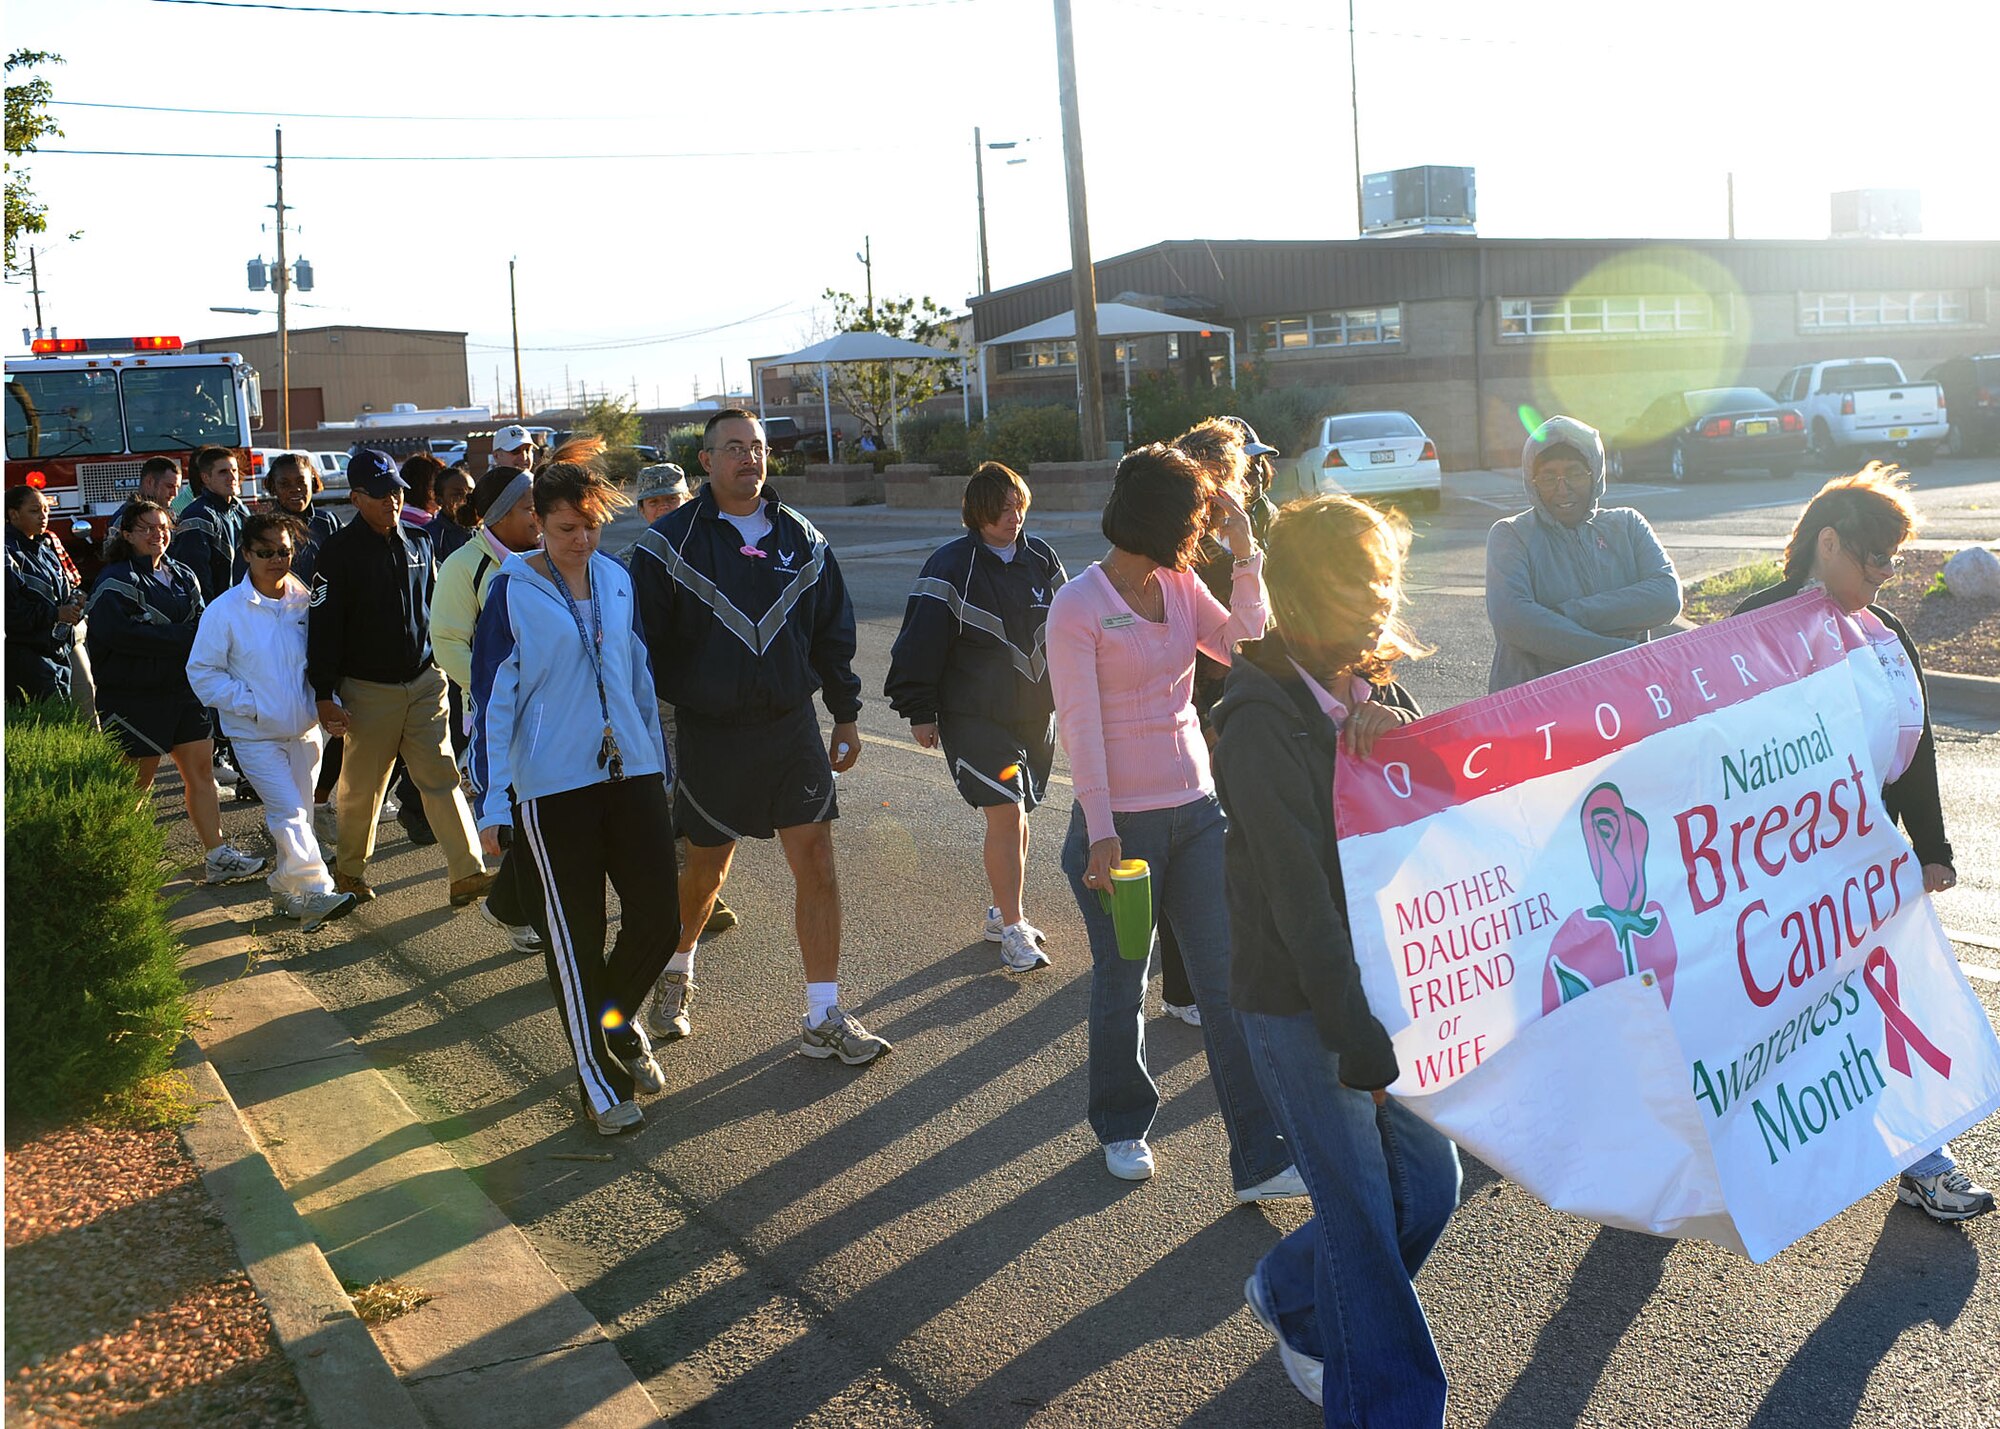 Participants in the Walk Against Breast Cancer began walking in front of the base housing office at Holloman Air Force Base, N.M., October 22. The walk was a mile in length to support National Breast Cancer Awareness Month. (U.S Air Force photo/ Airman 1st Class DeAndre Curtiss)